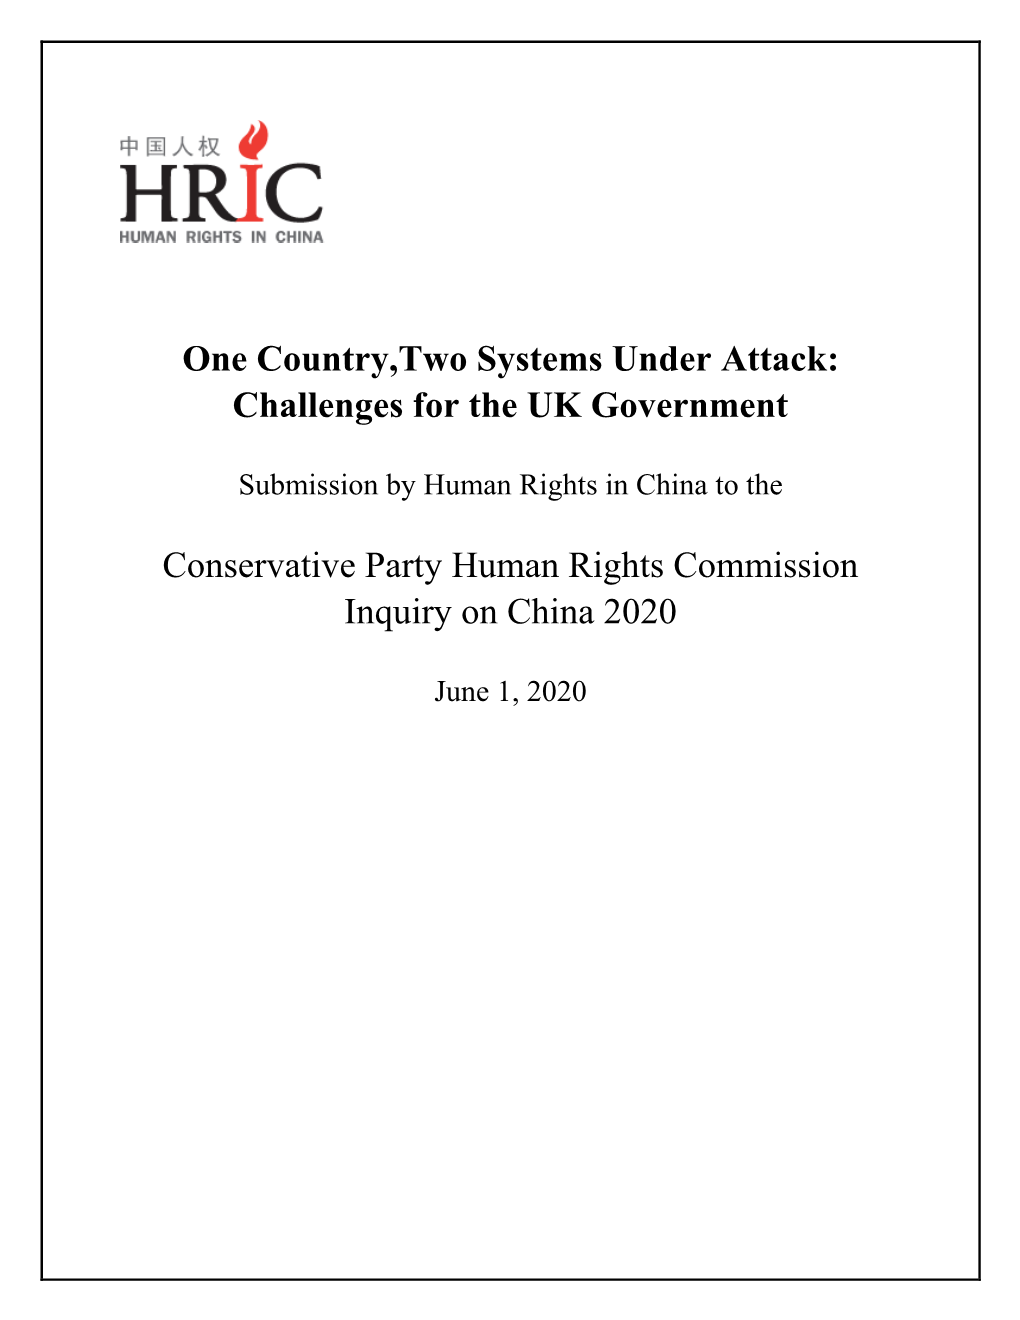 HRIC Submission to Conservative Party Human Rights Commission